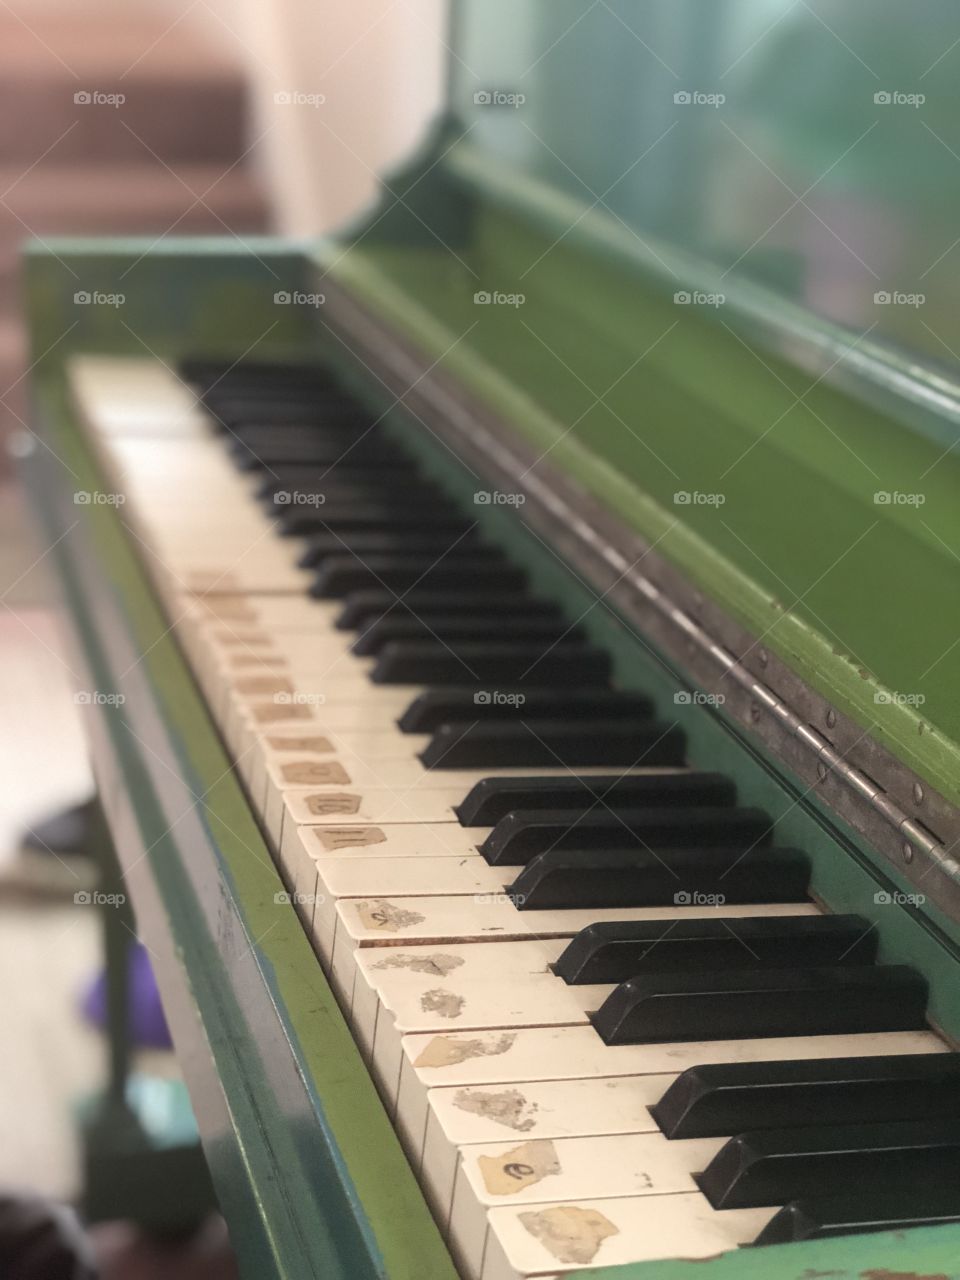 Worn keys on an old piano on an angle